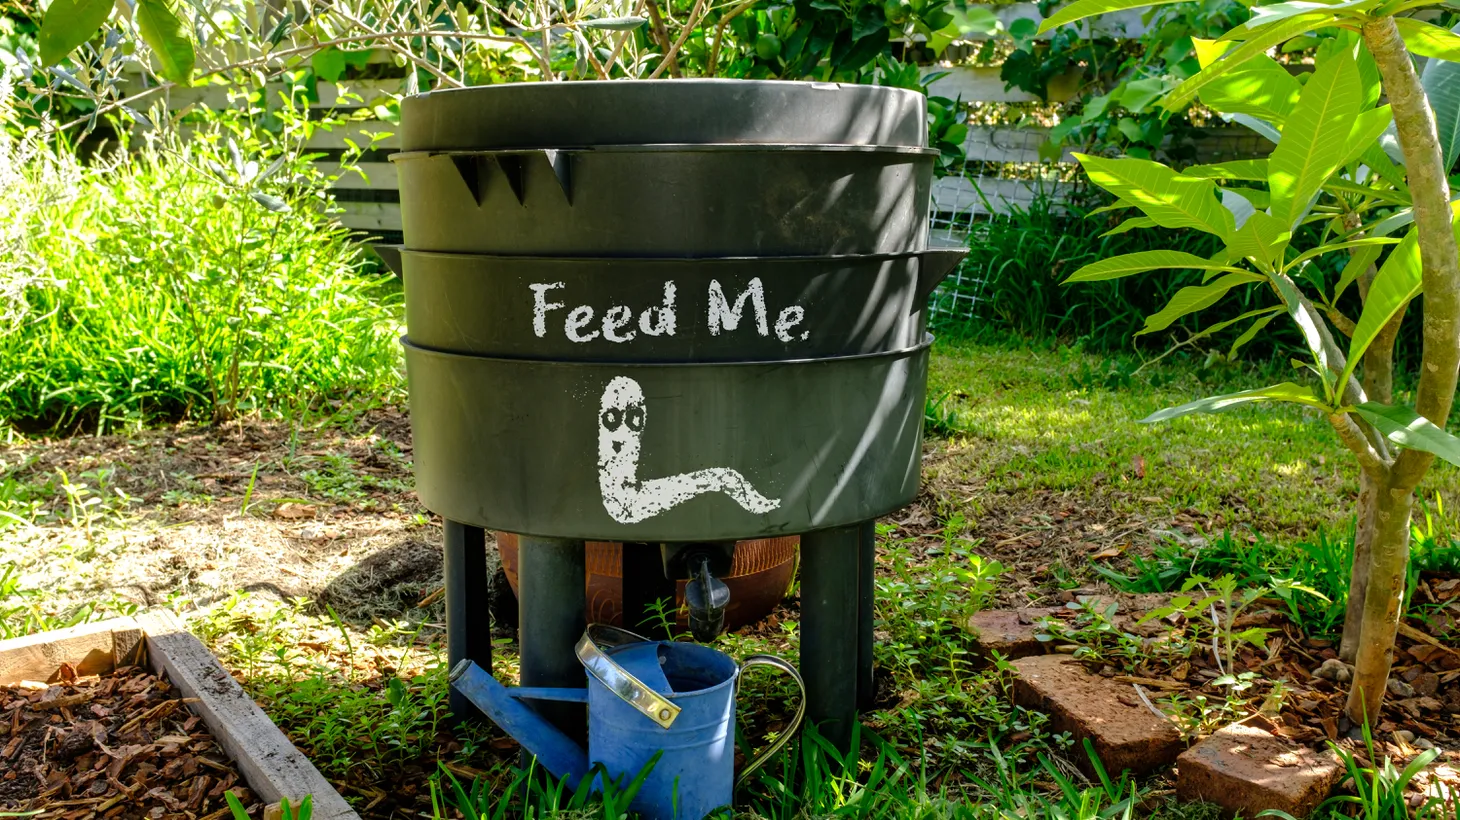 A compost bin features an illustration of a worm on it, with the words “feed me.” You can buy worms at Will’s Worms in Studio City, McCrawl’s Red Worms in Cypress, and Jewlz Grimy Ground Grubbers in Oceanside, recommends LA Times writer Jeanette Marantos.